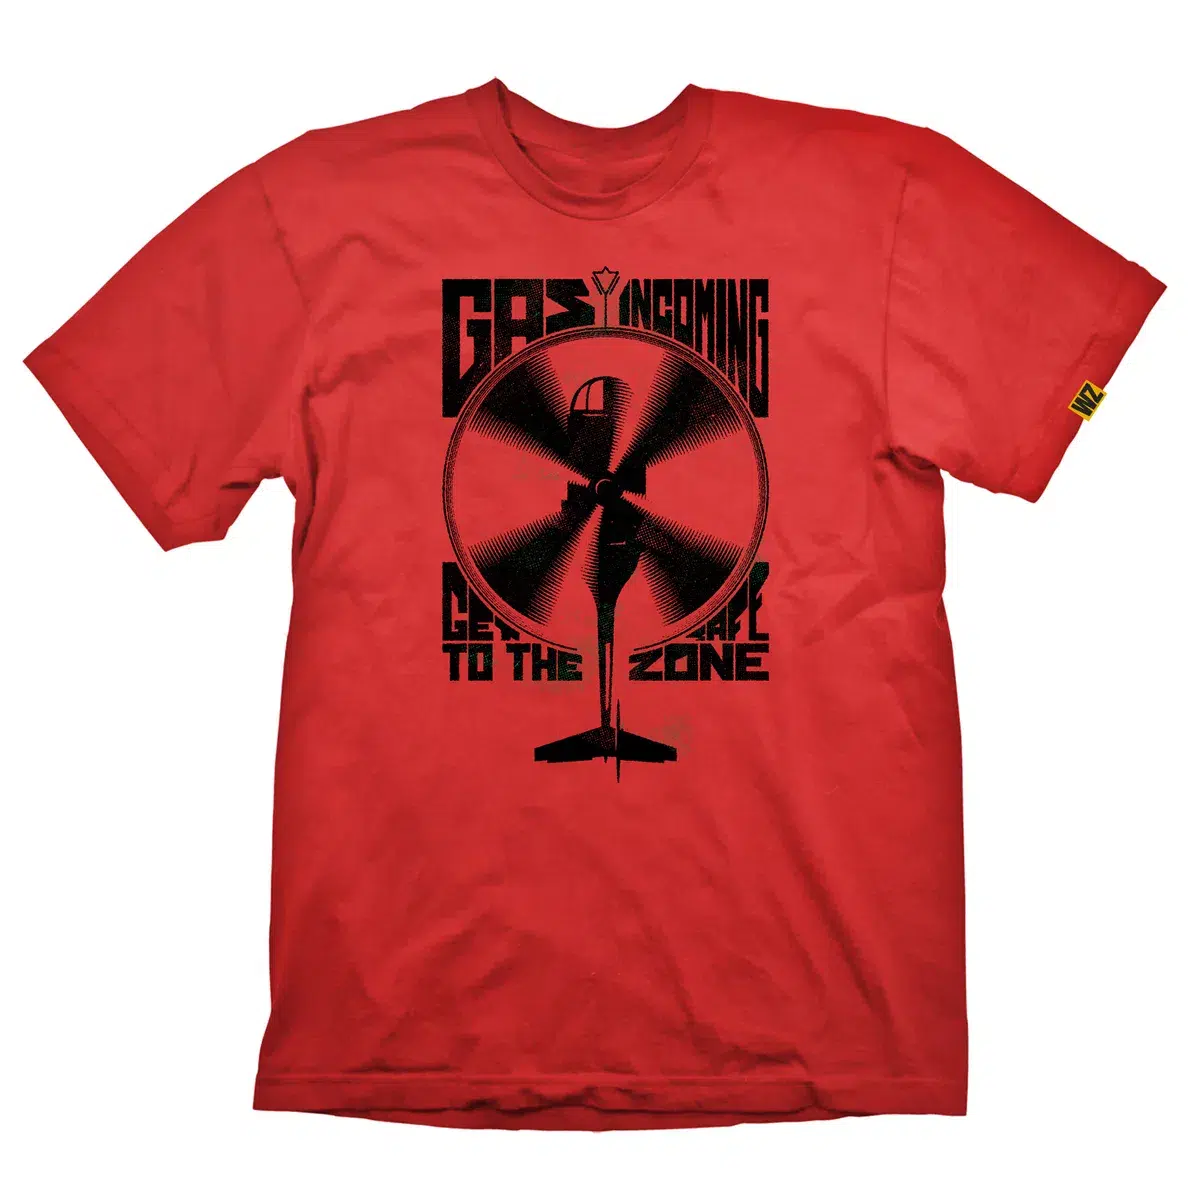 Call of Duty Warzone T-Shirt "Gas Incoming" Red